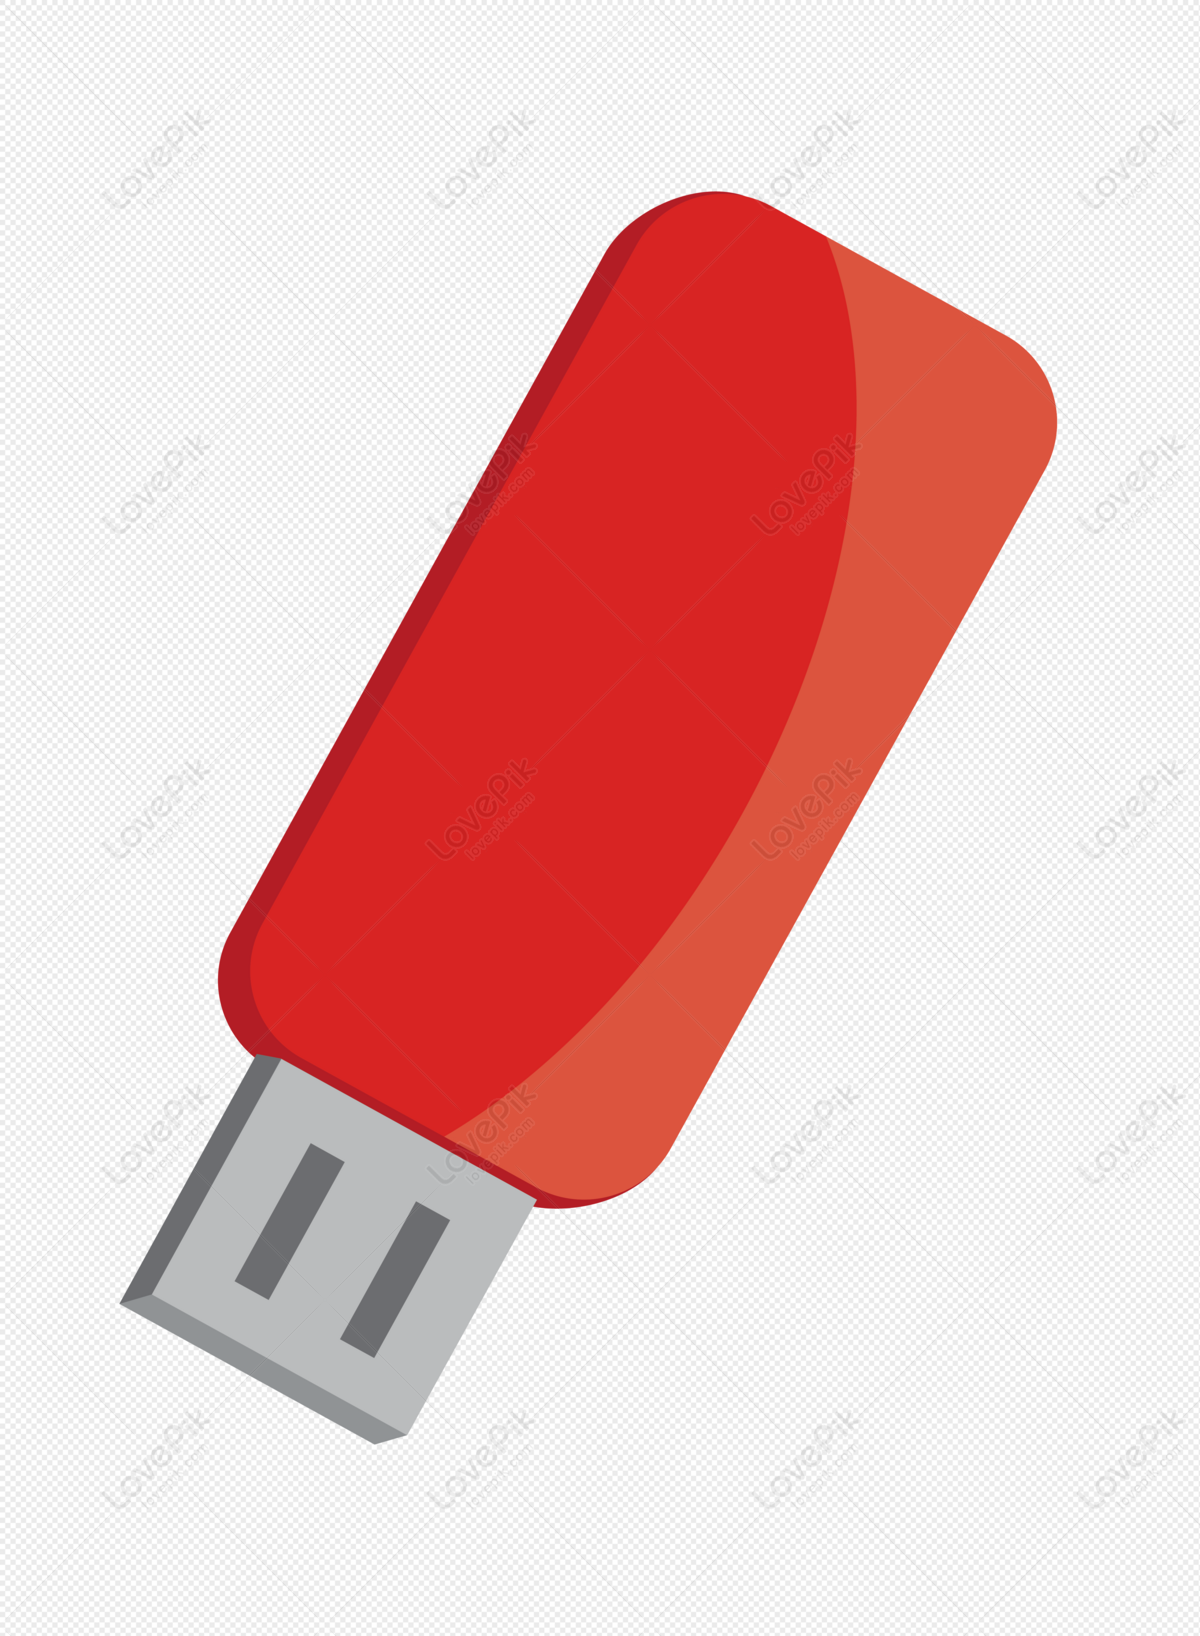 Usb PNG And Clipart Image For Free Download - Lovepik | 400237699